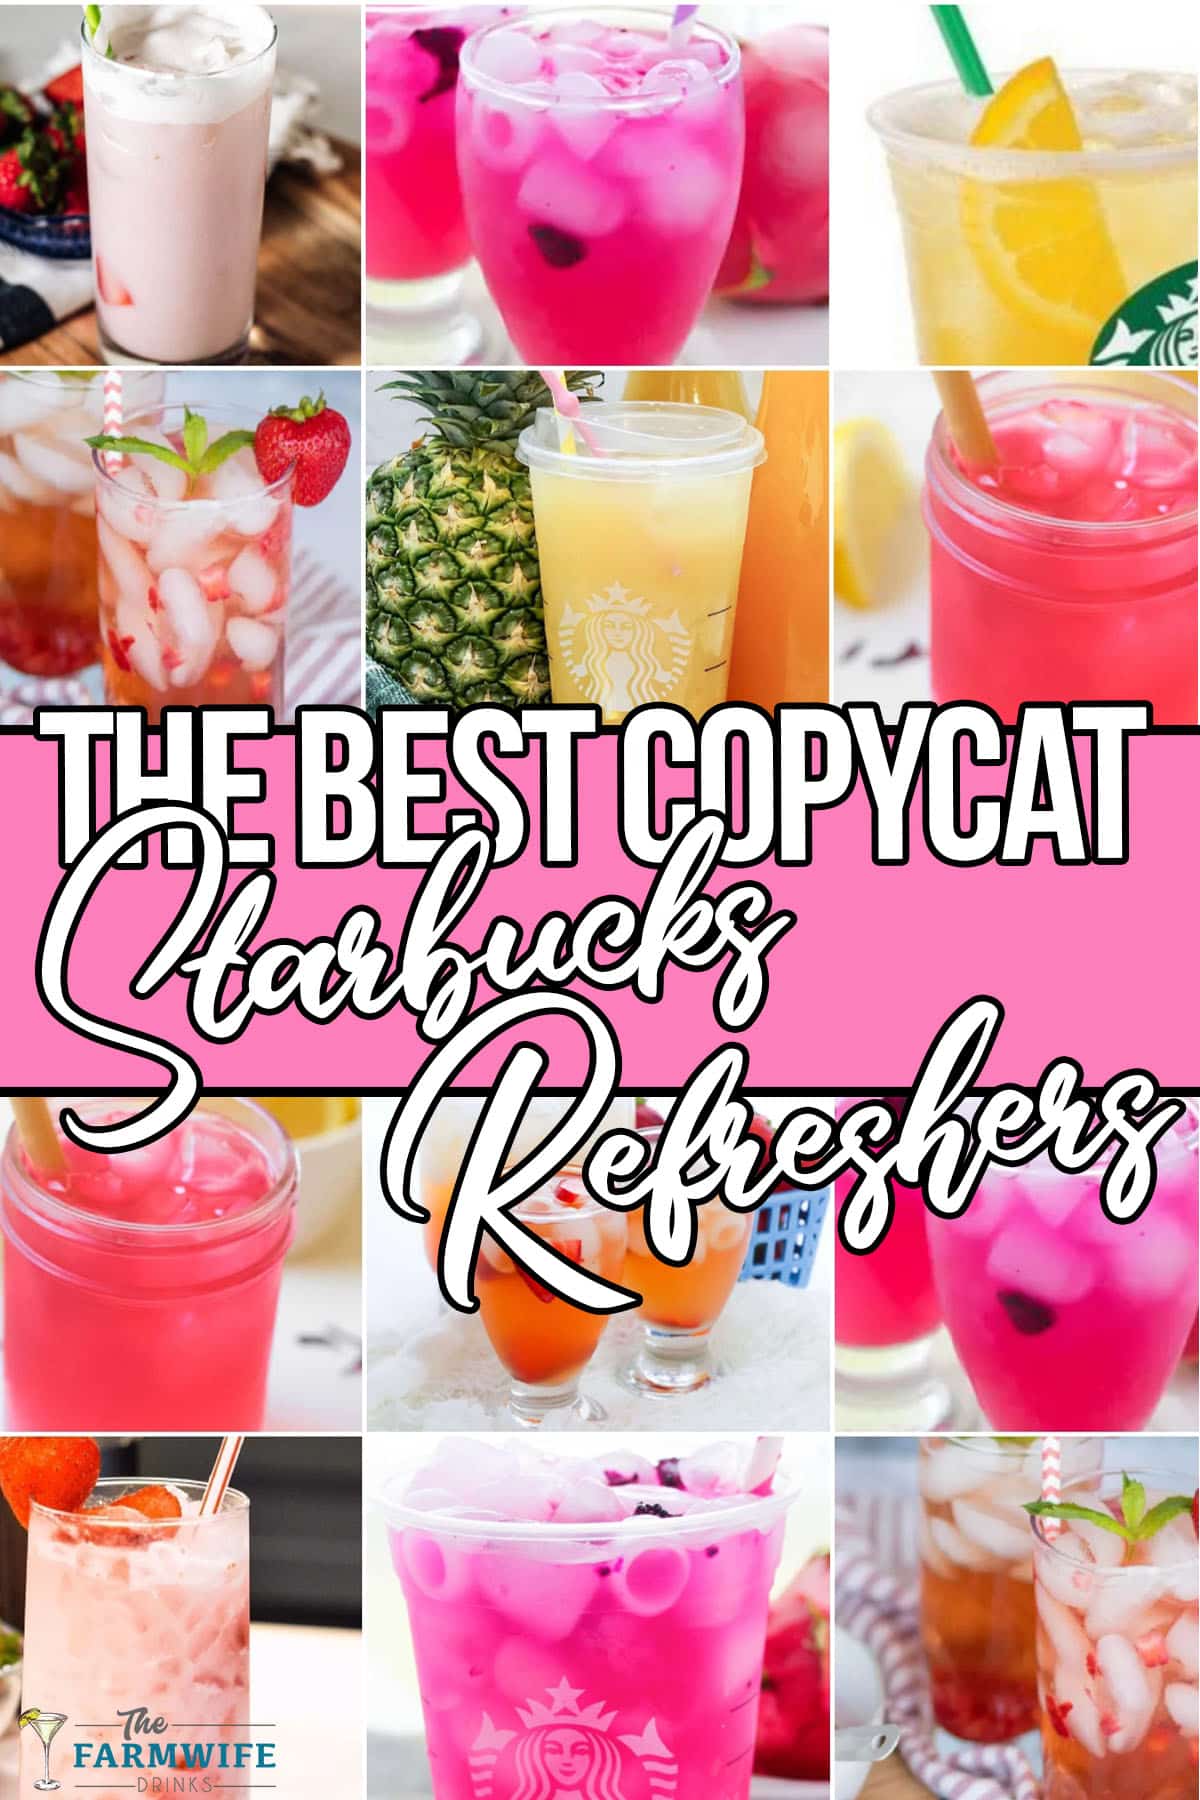 photo collage of starbucks refresheres dupes with text which reads the best copycat starbucks refreshers